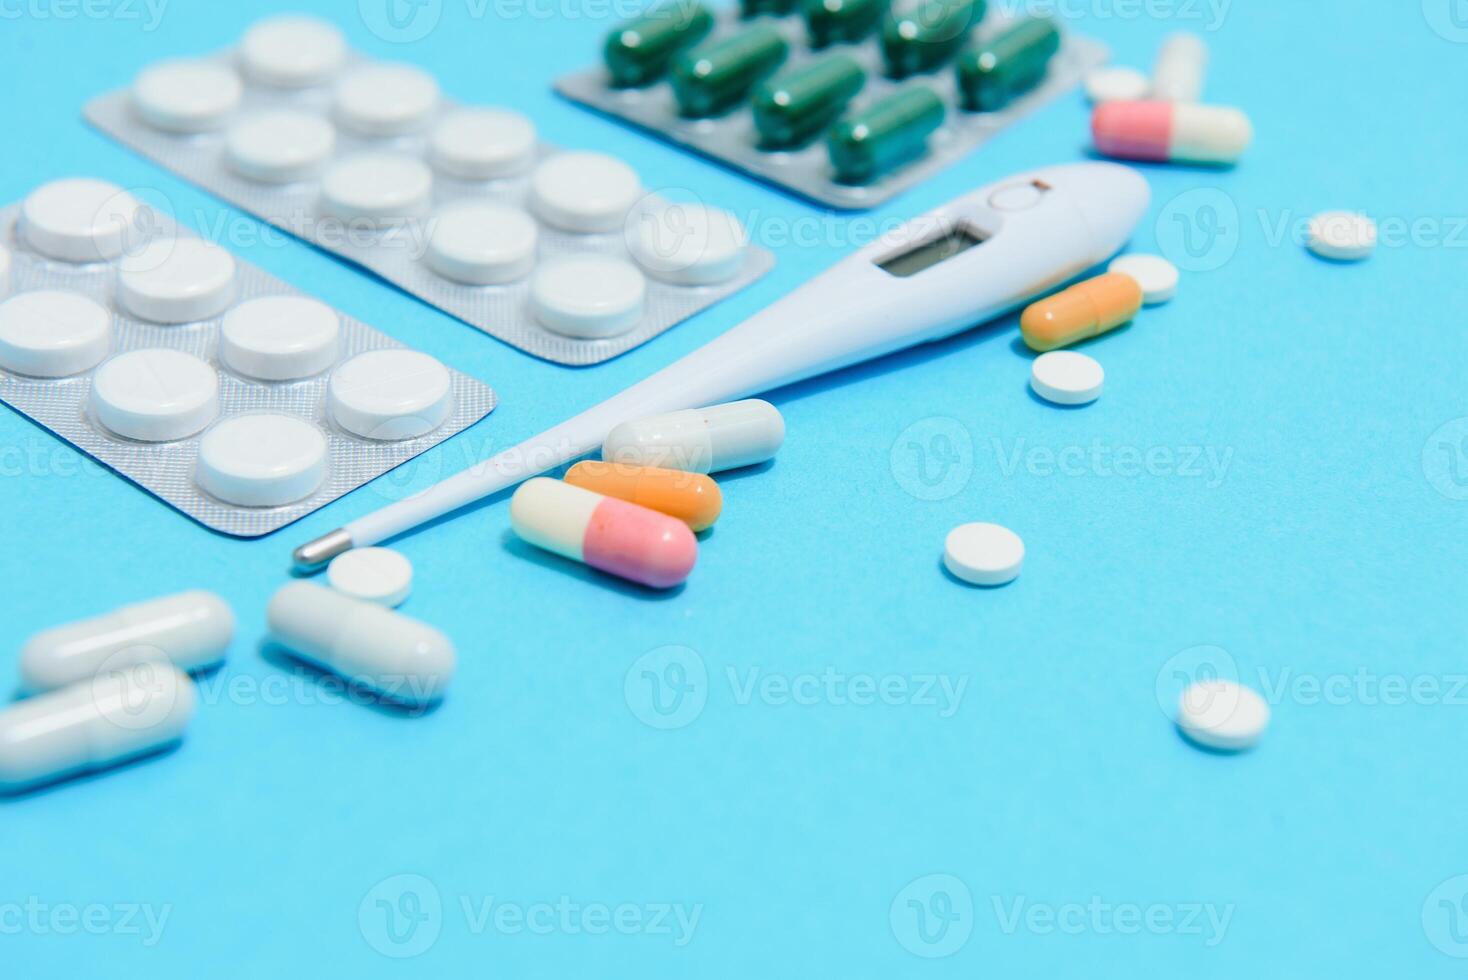 Supplements and pills blister packs, close-up. Place to insert your text, blue background. Pharmacists and clinics photo